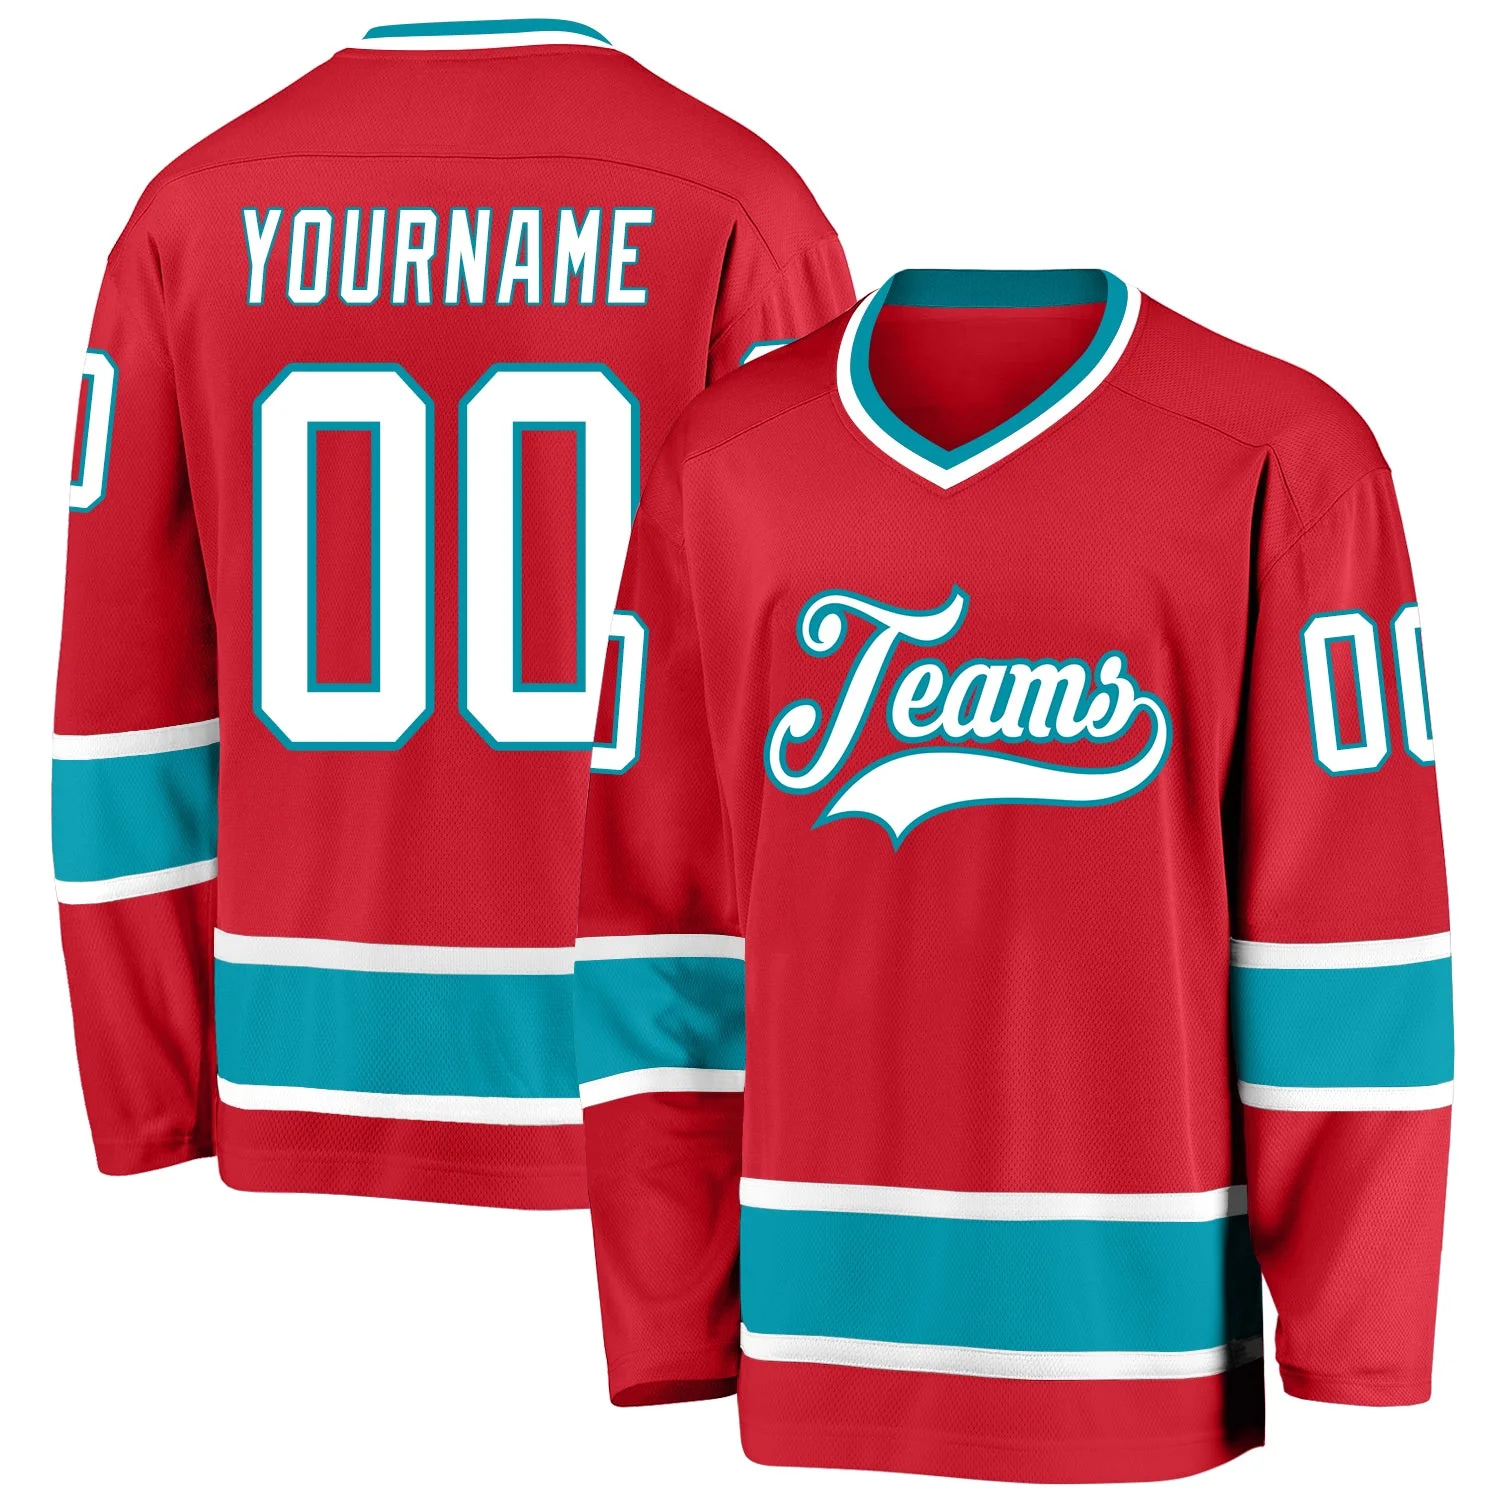 Stitched And Print Red White-teal Hockey Jersey Custom